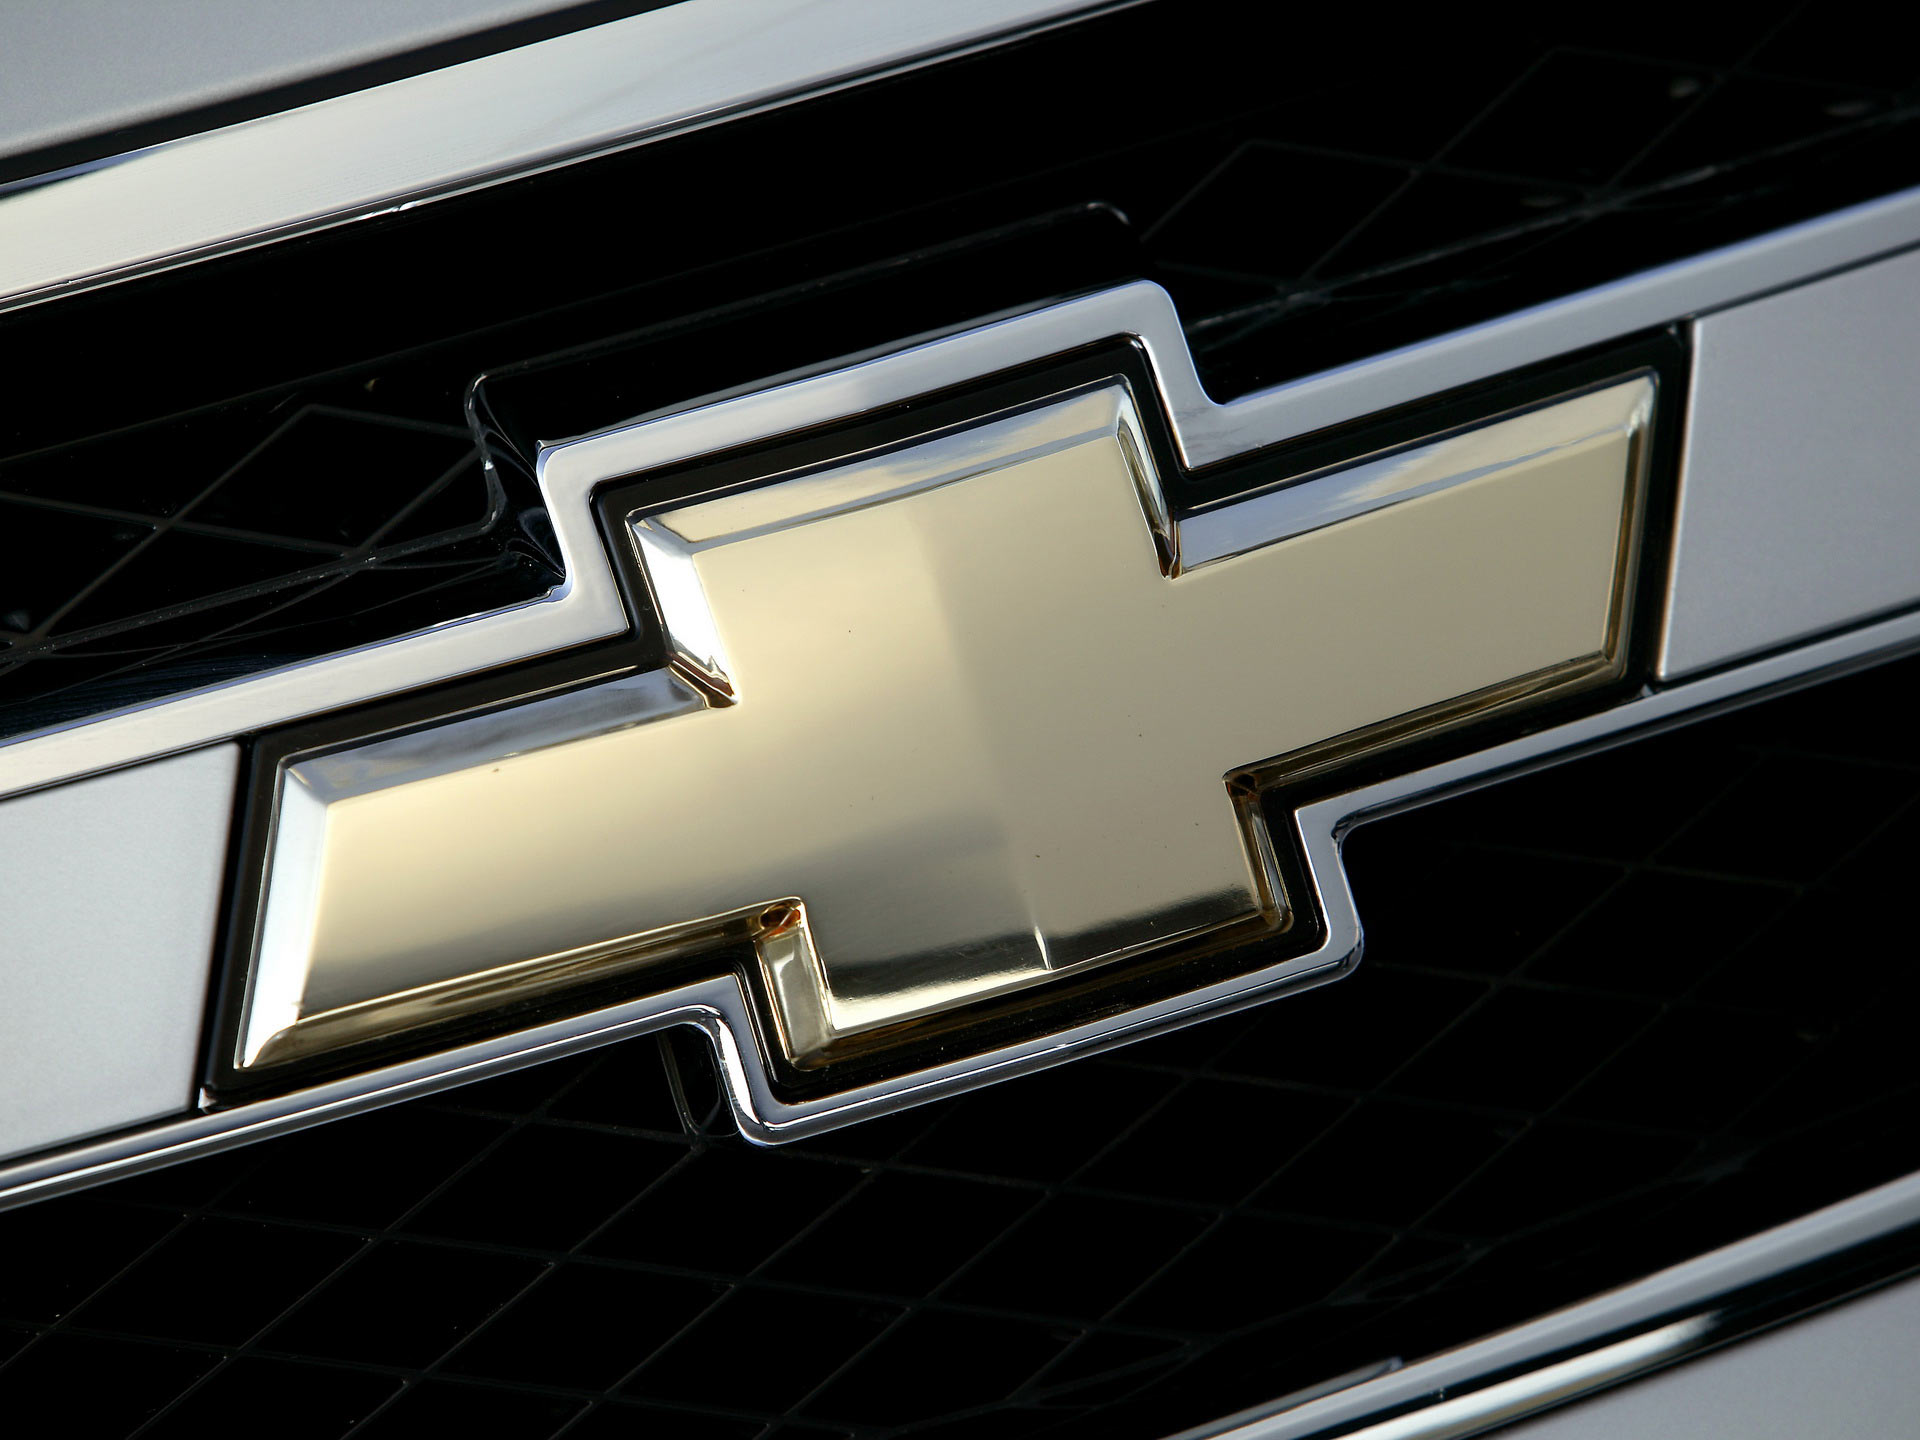 Chevy Logo Wallpaper 4377 Hd Wallpapers in Logos   Imagescicom 1920x1440